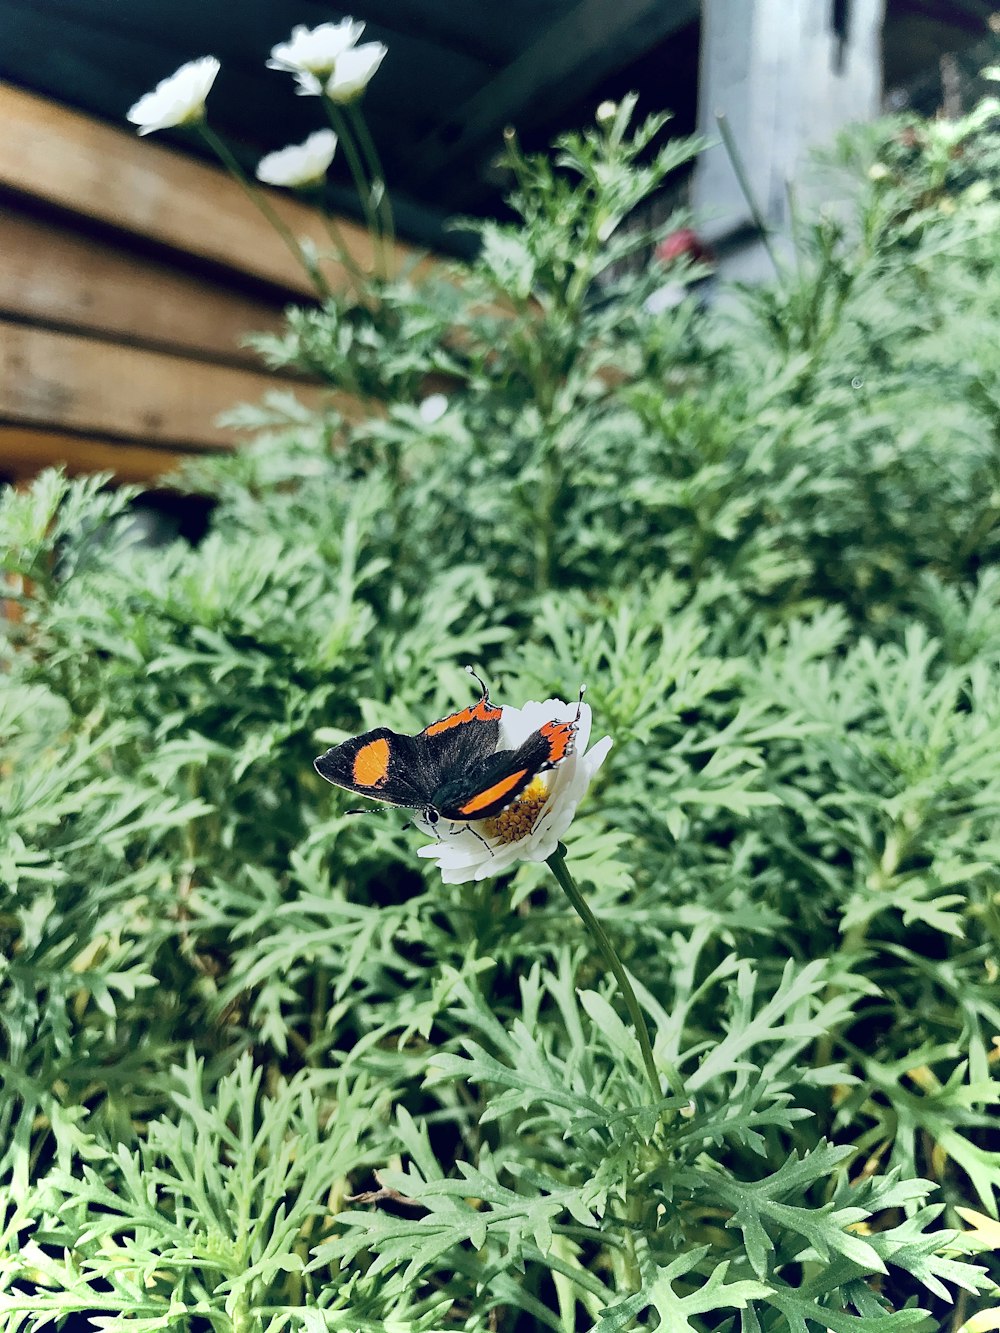 black orange and white butterfly perched on green plant during daytime